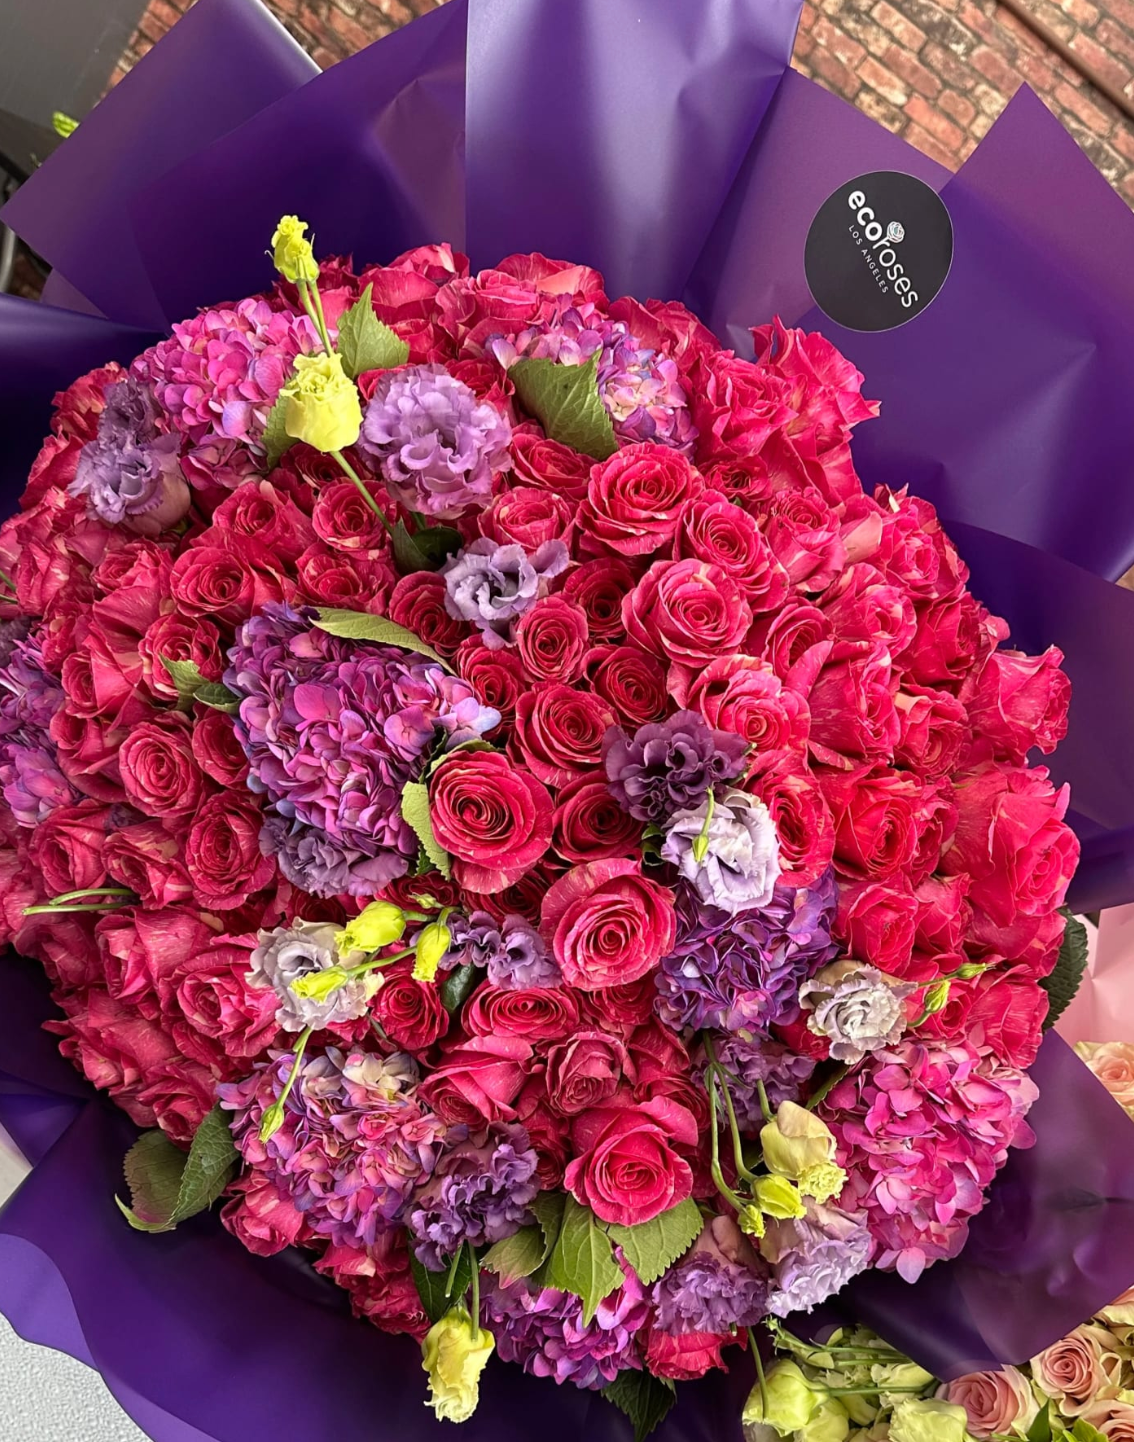 Roses from Pandora's Box, a captivating bouquet filled with mystery and enchantment Flower Shop In Glendale